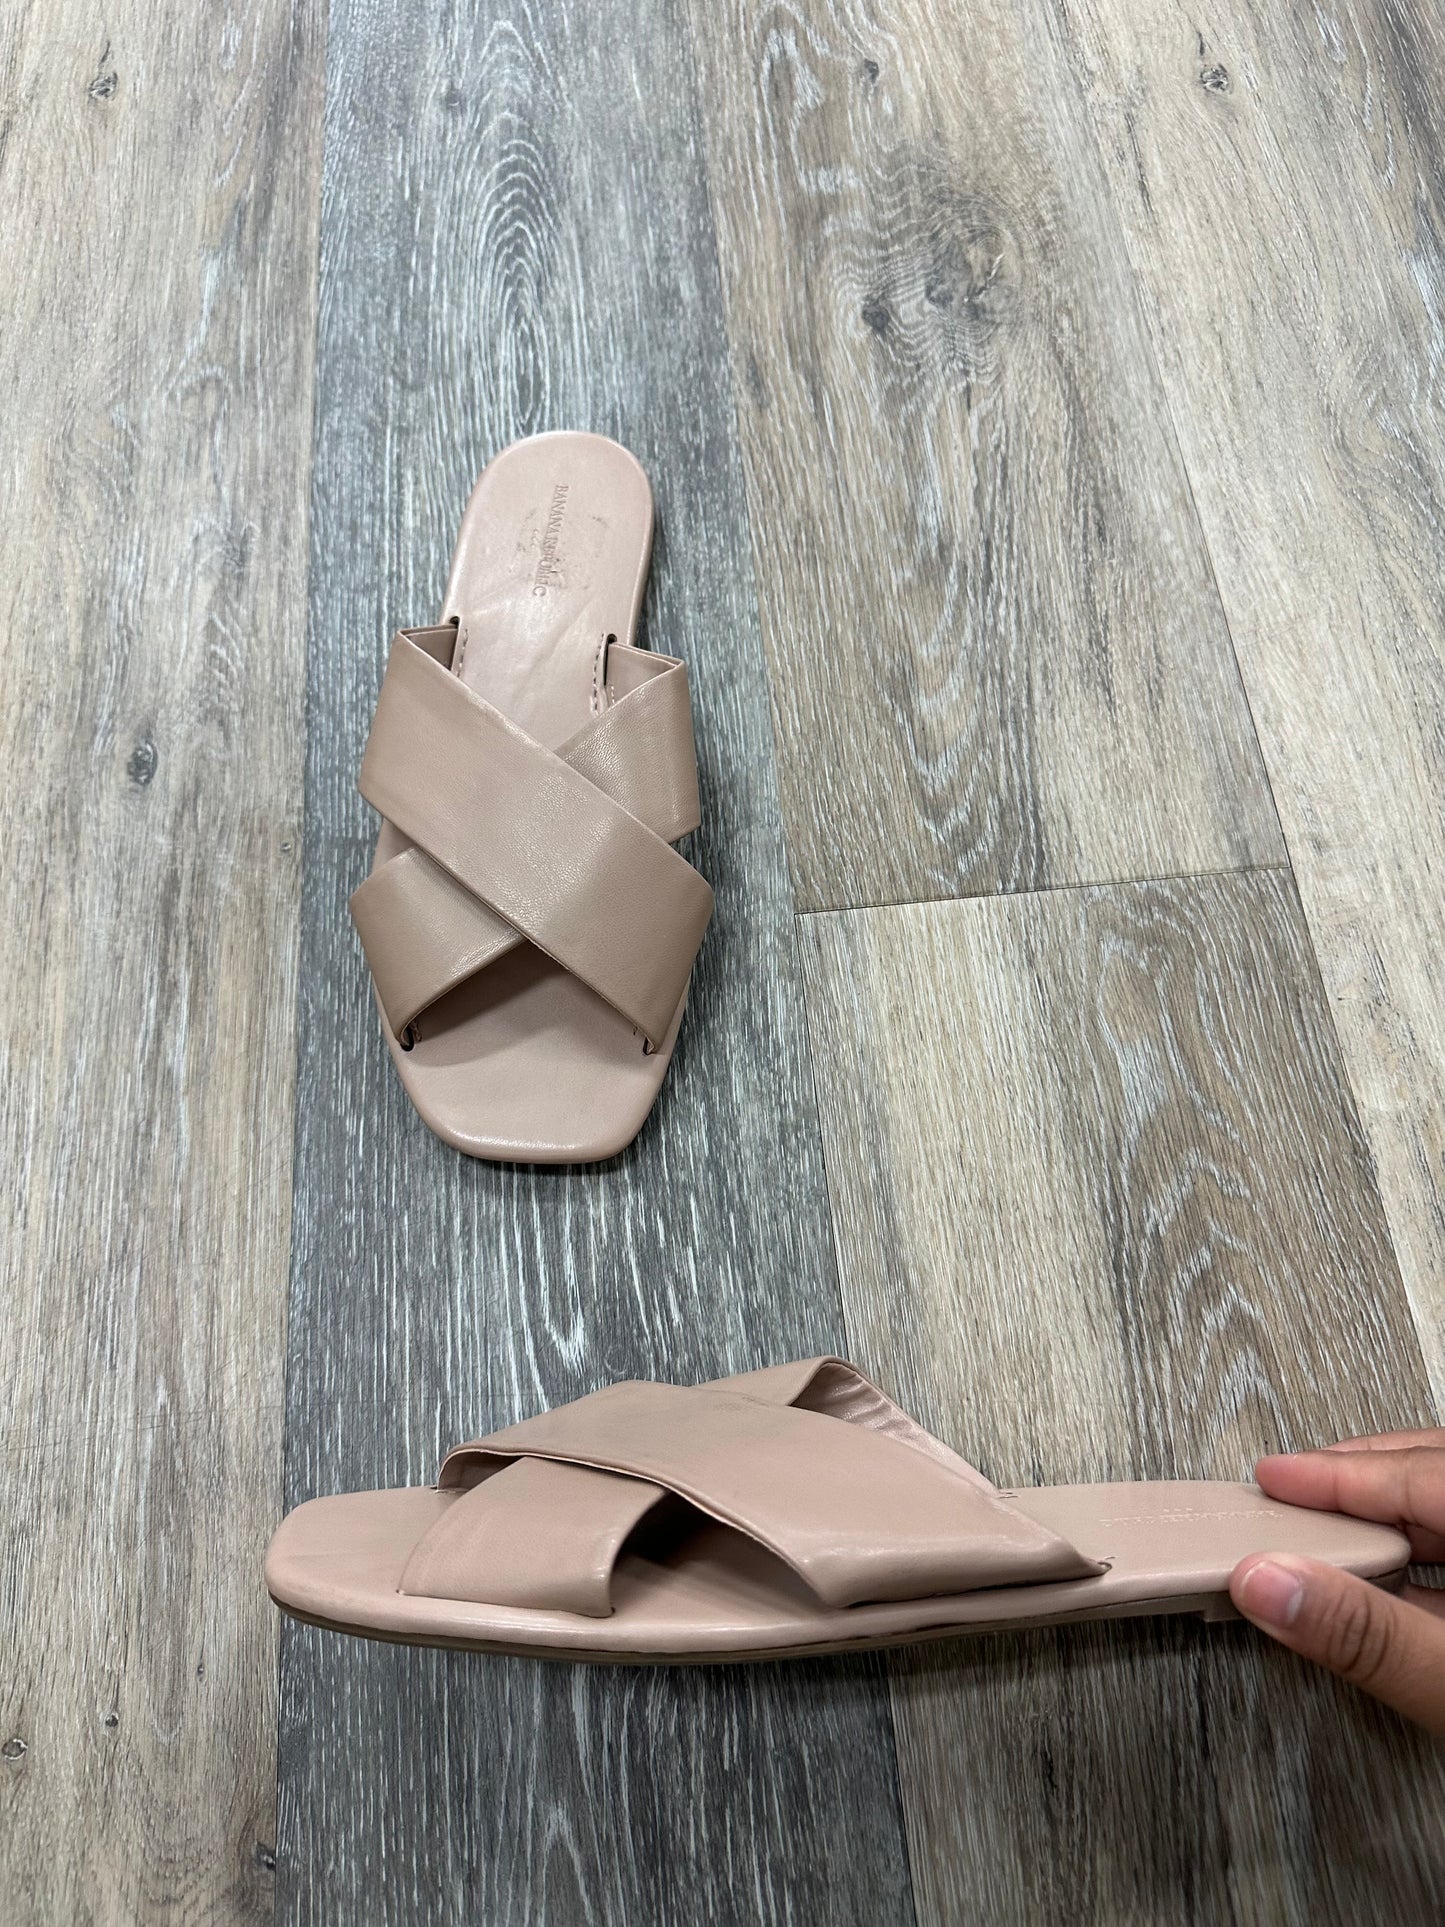 Sandals Flats By Banana Republic  Size: 7.5